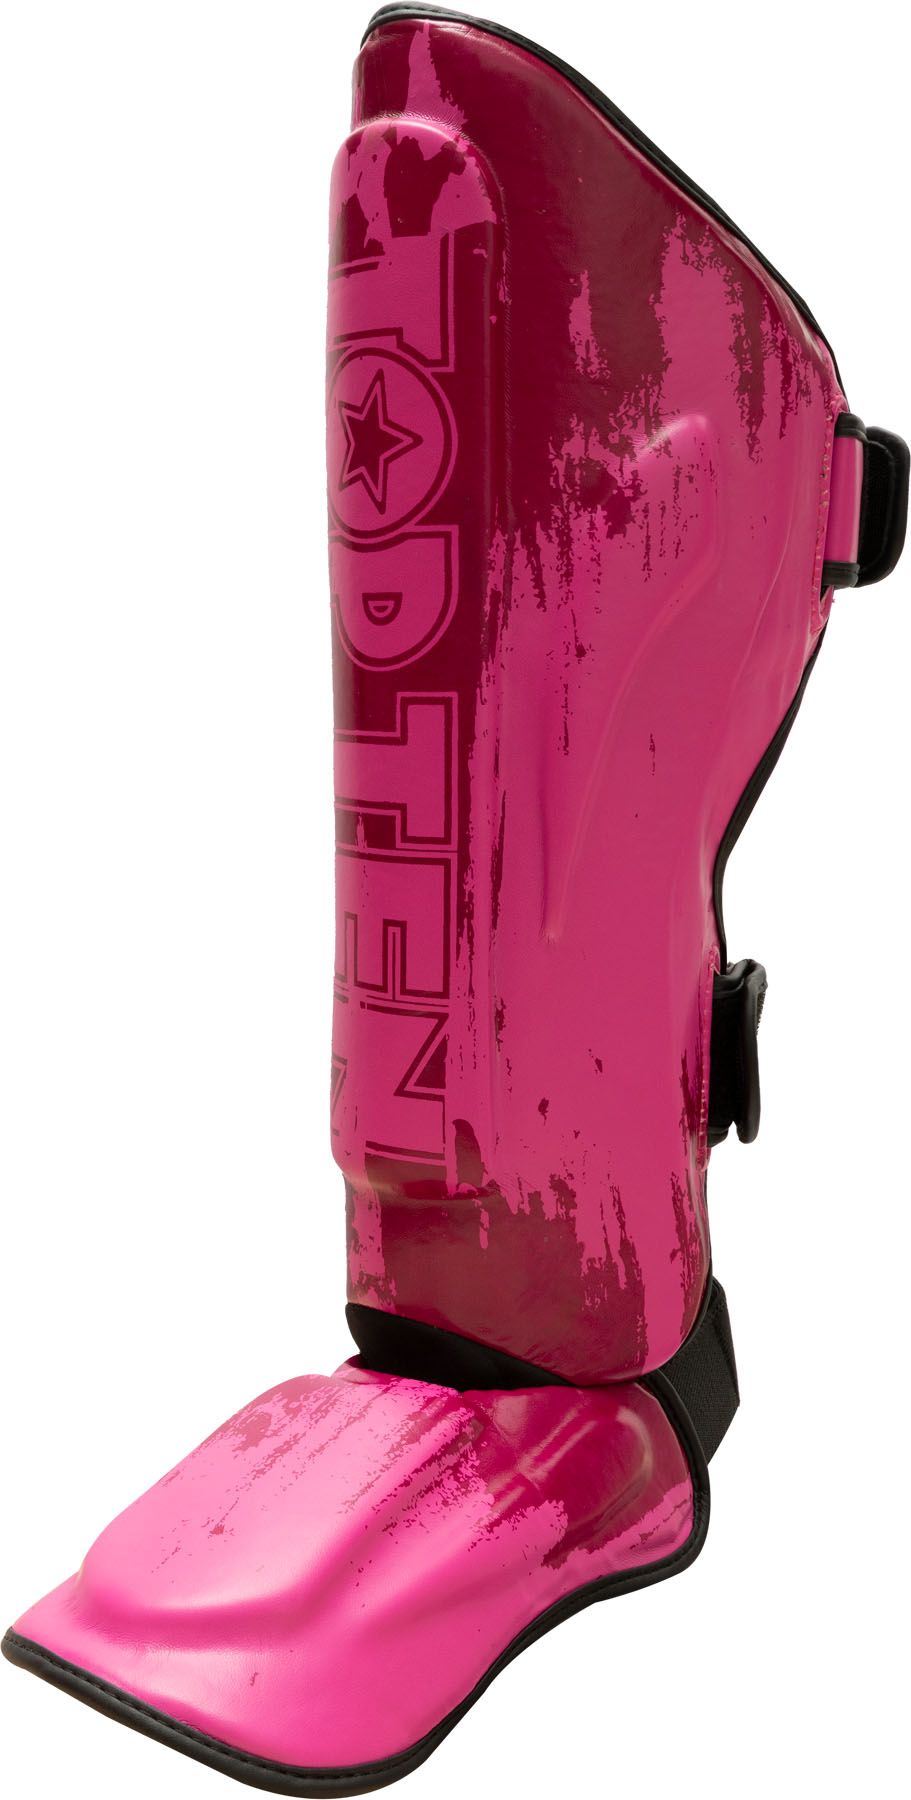 Top Ten Shin and Instep Guard “Power Ink” - pink – Fighters Europe